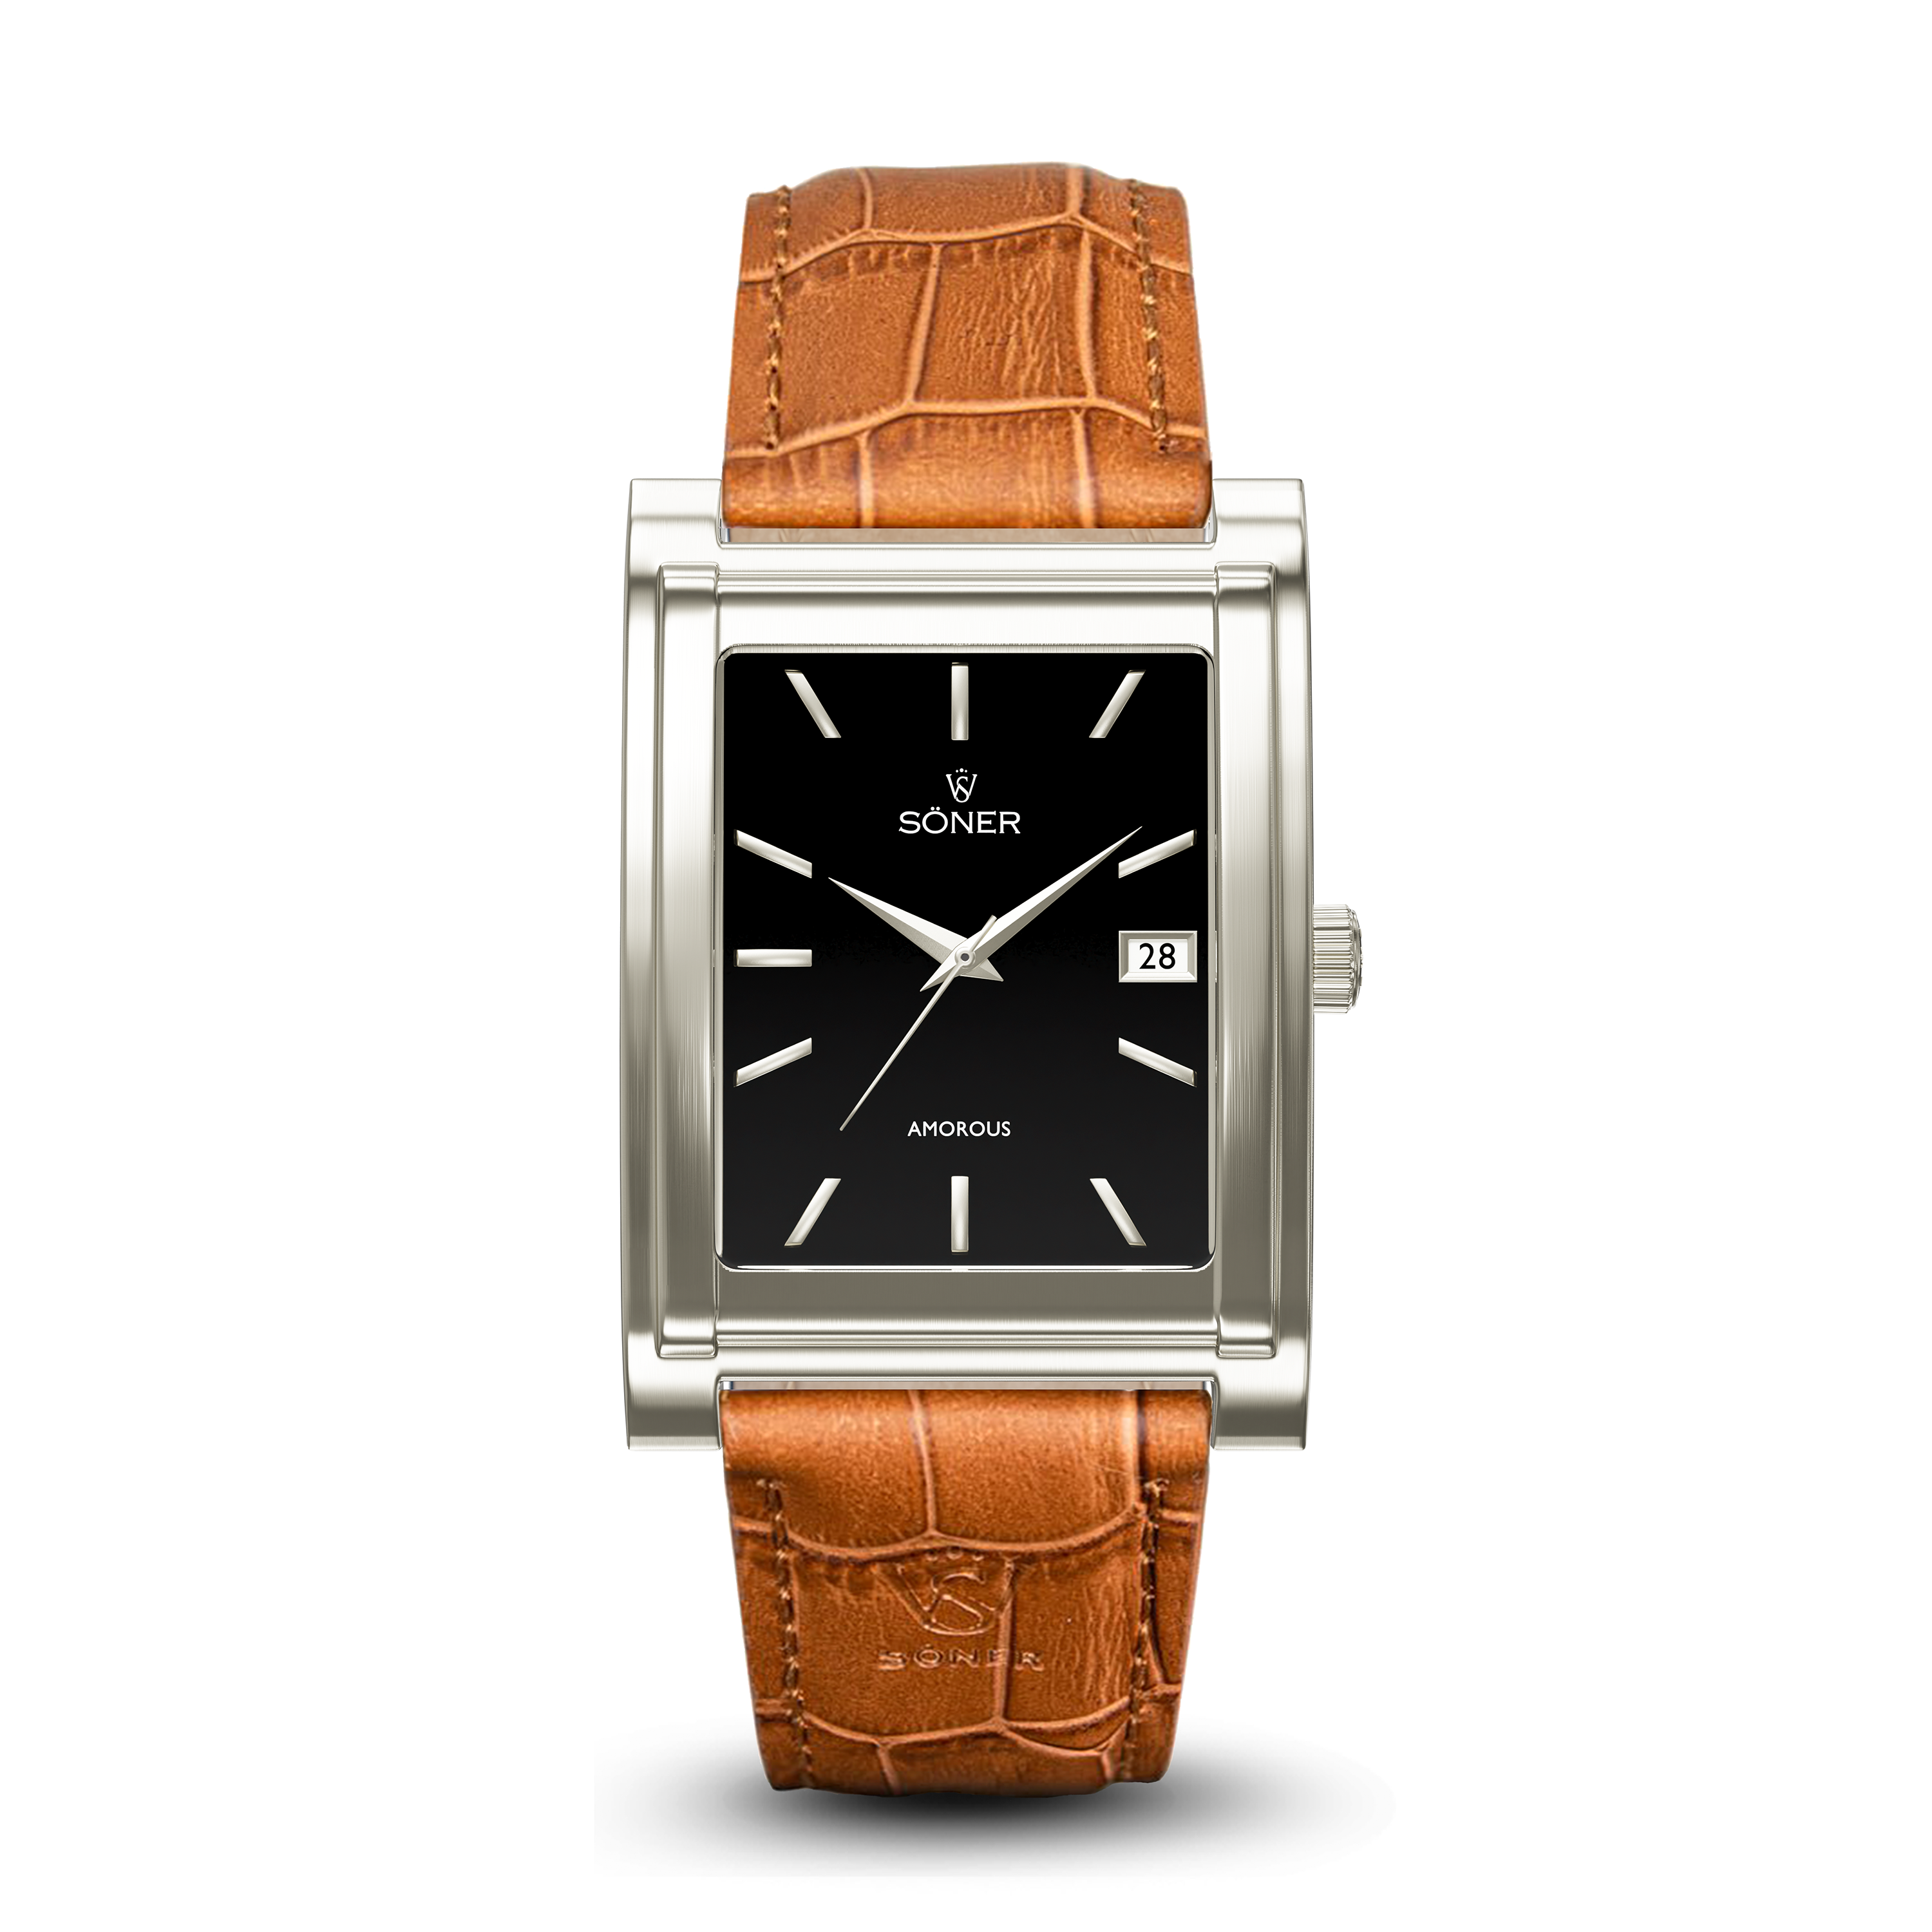 Square automatic watch, Amorous Sydney with black dial - light brown alligator pattern leather strap front view